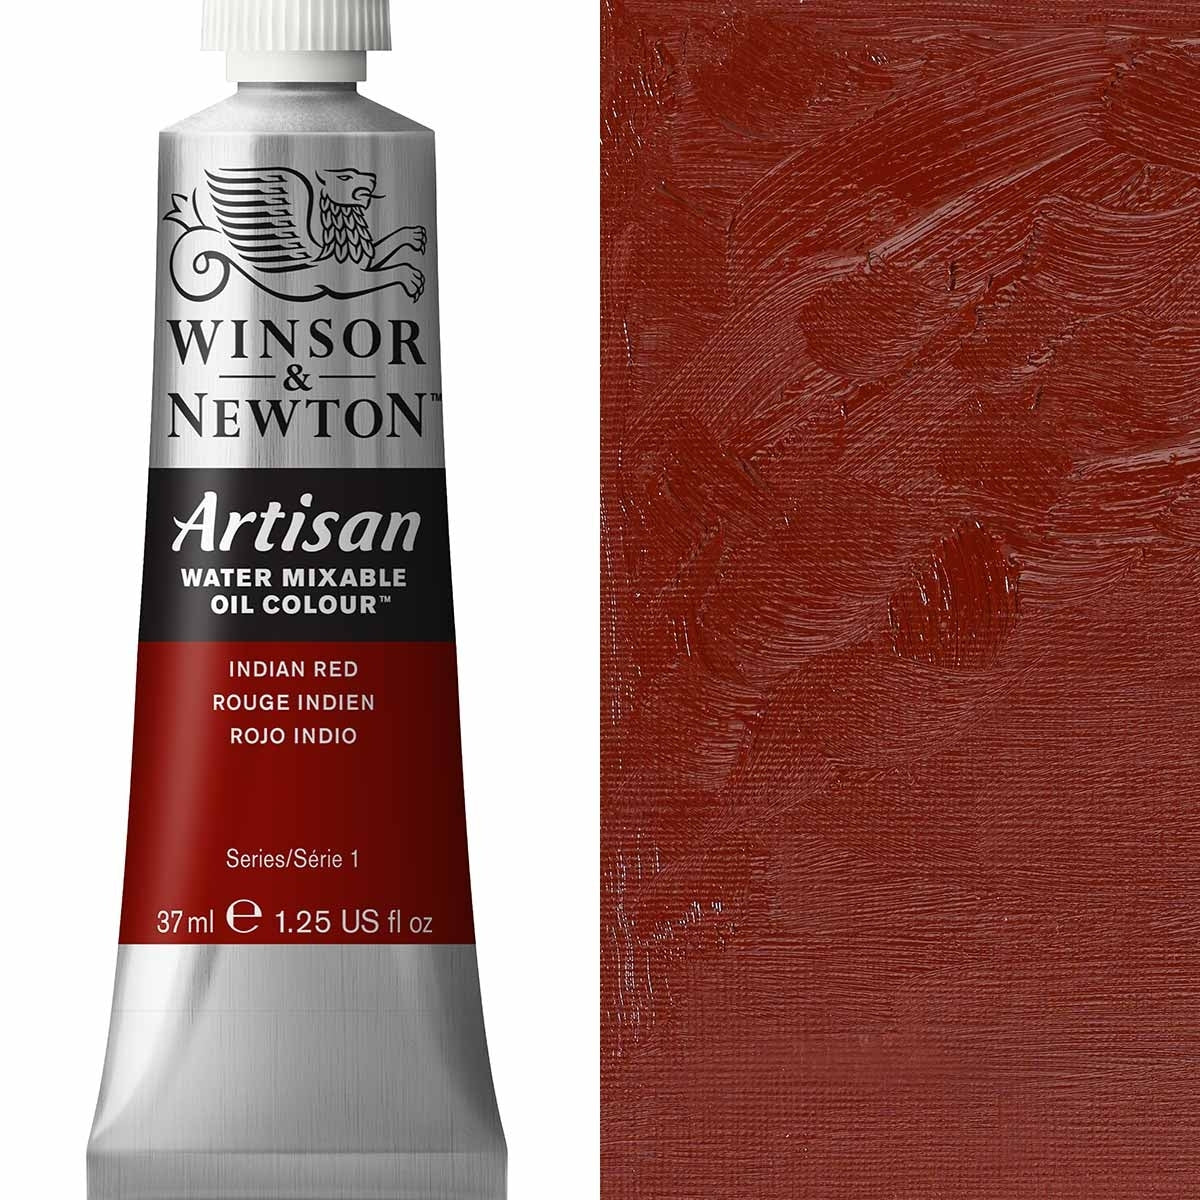 Winsor and Newton - Artisan Oil Colour Watermixable - 37ml - Indian Red